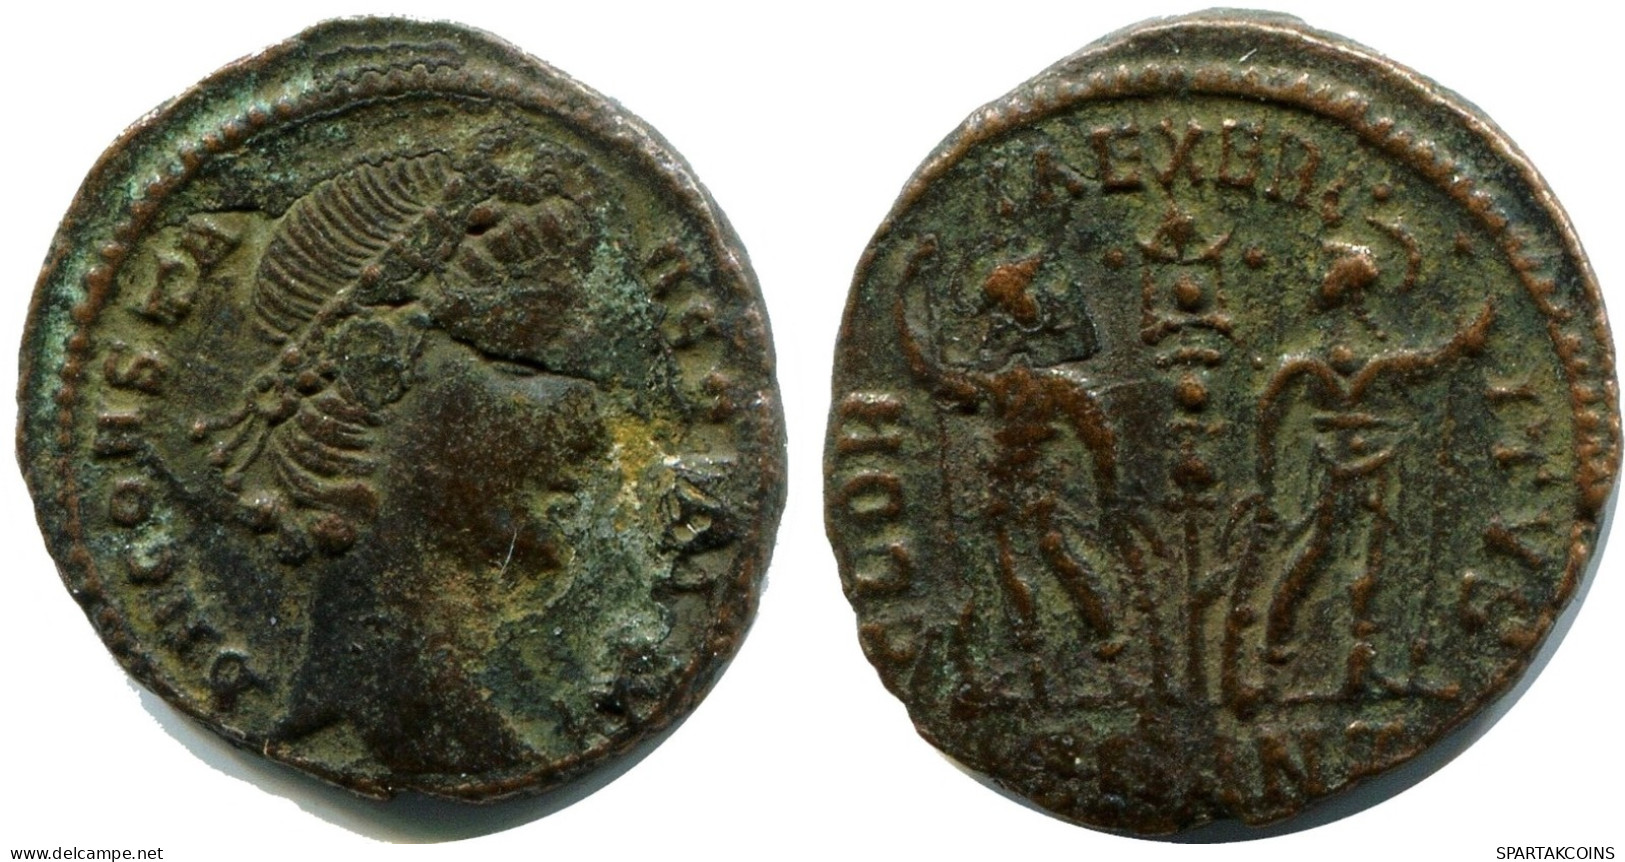 CONSTANS MINTED IN ANTIOCH FROM THE ROYAL ONTARIO MUSEUM #ANC11800.14.F.A - Der Christlischen Kaiser (307 / 363)